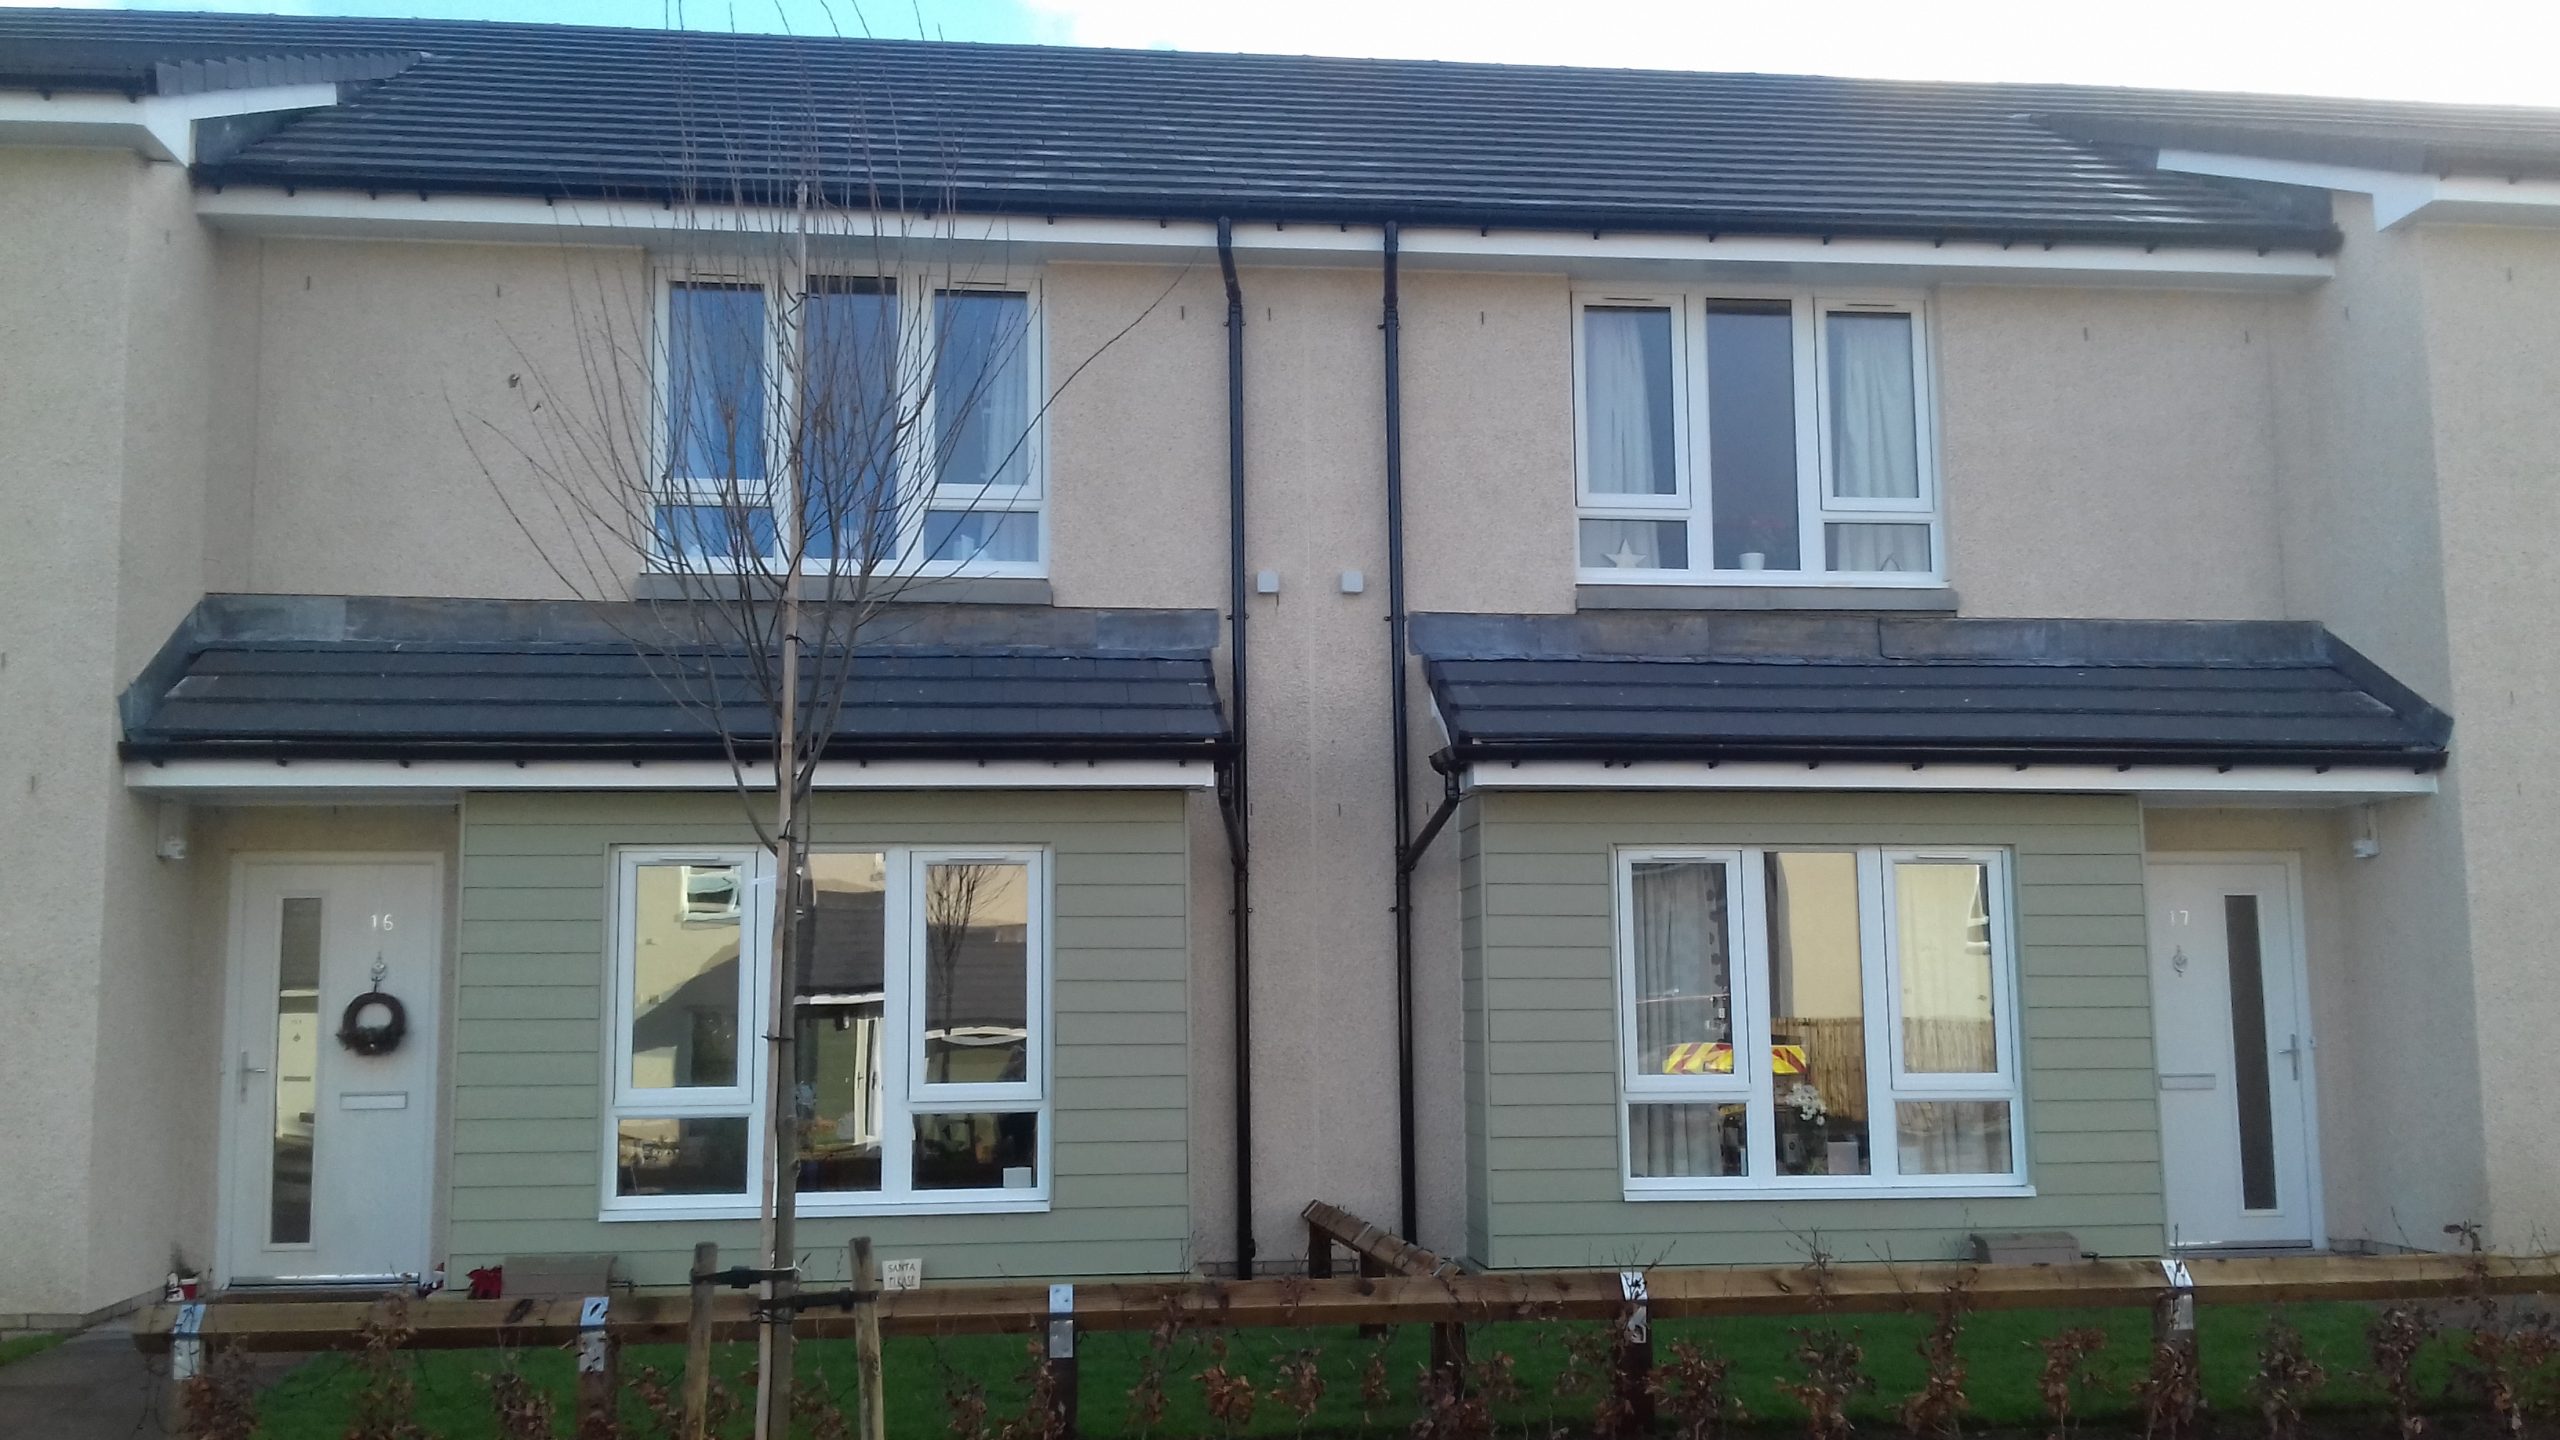 Clerk Street houses 4 GH 15.12.20 scaled 1 1 Hart Builders to deliver 265 new council homes in Midlothian